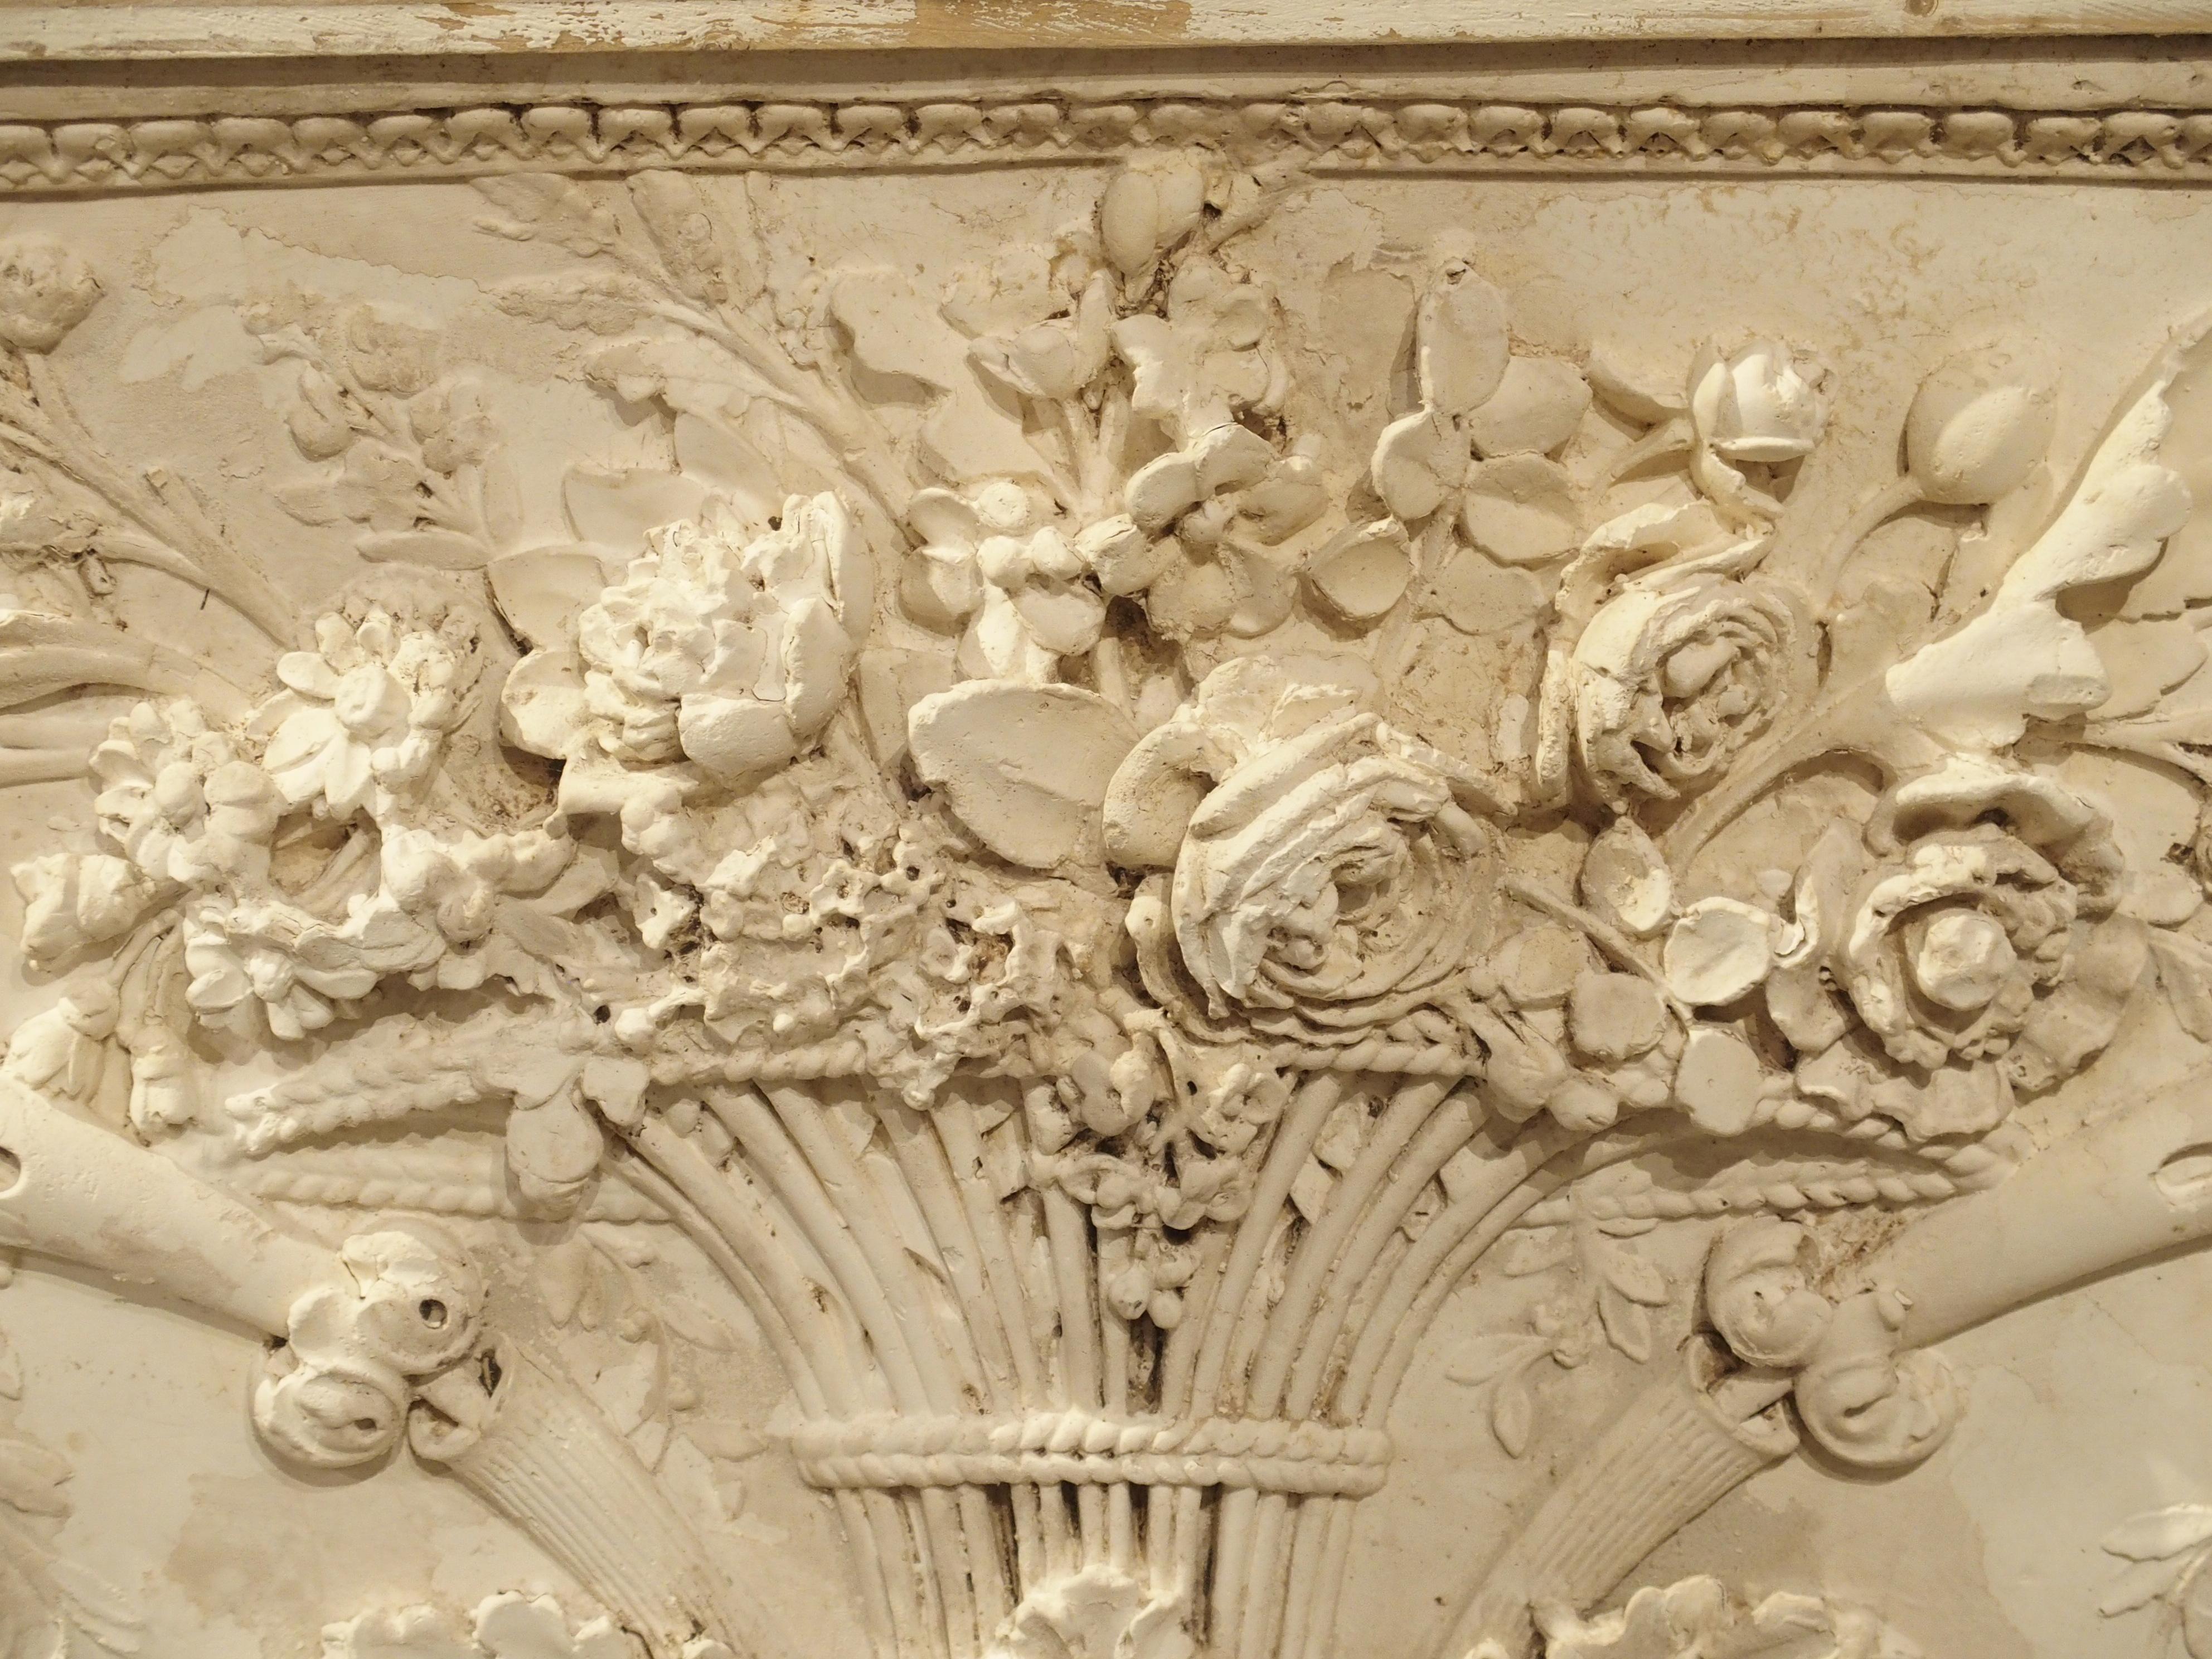 Contemporary Architectural Plaster and Wood Overdoor Panel from Provence, France